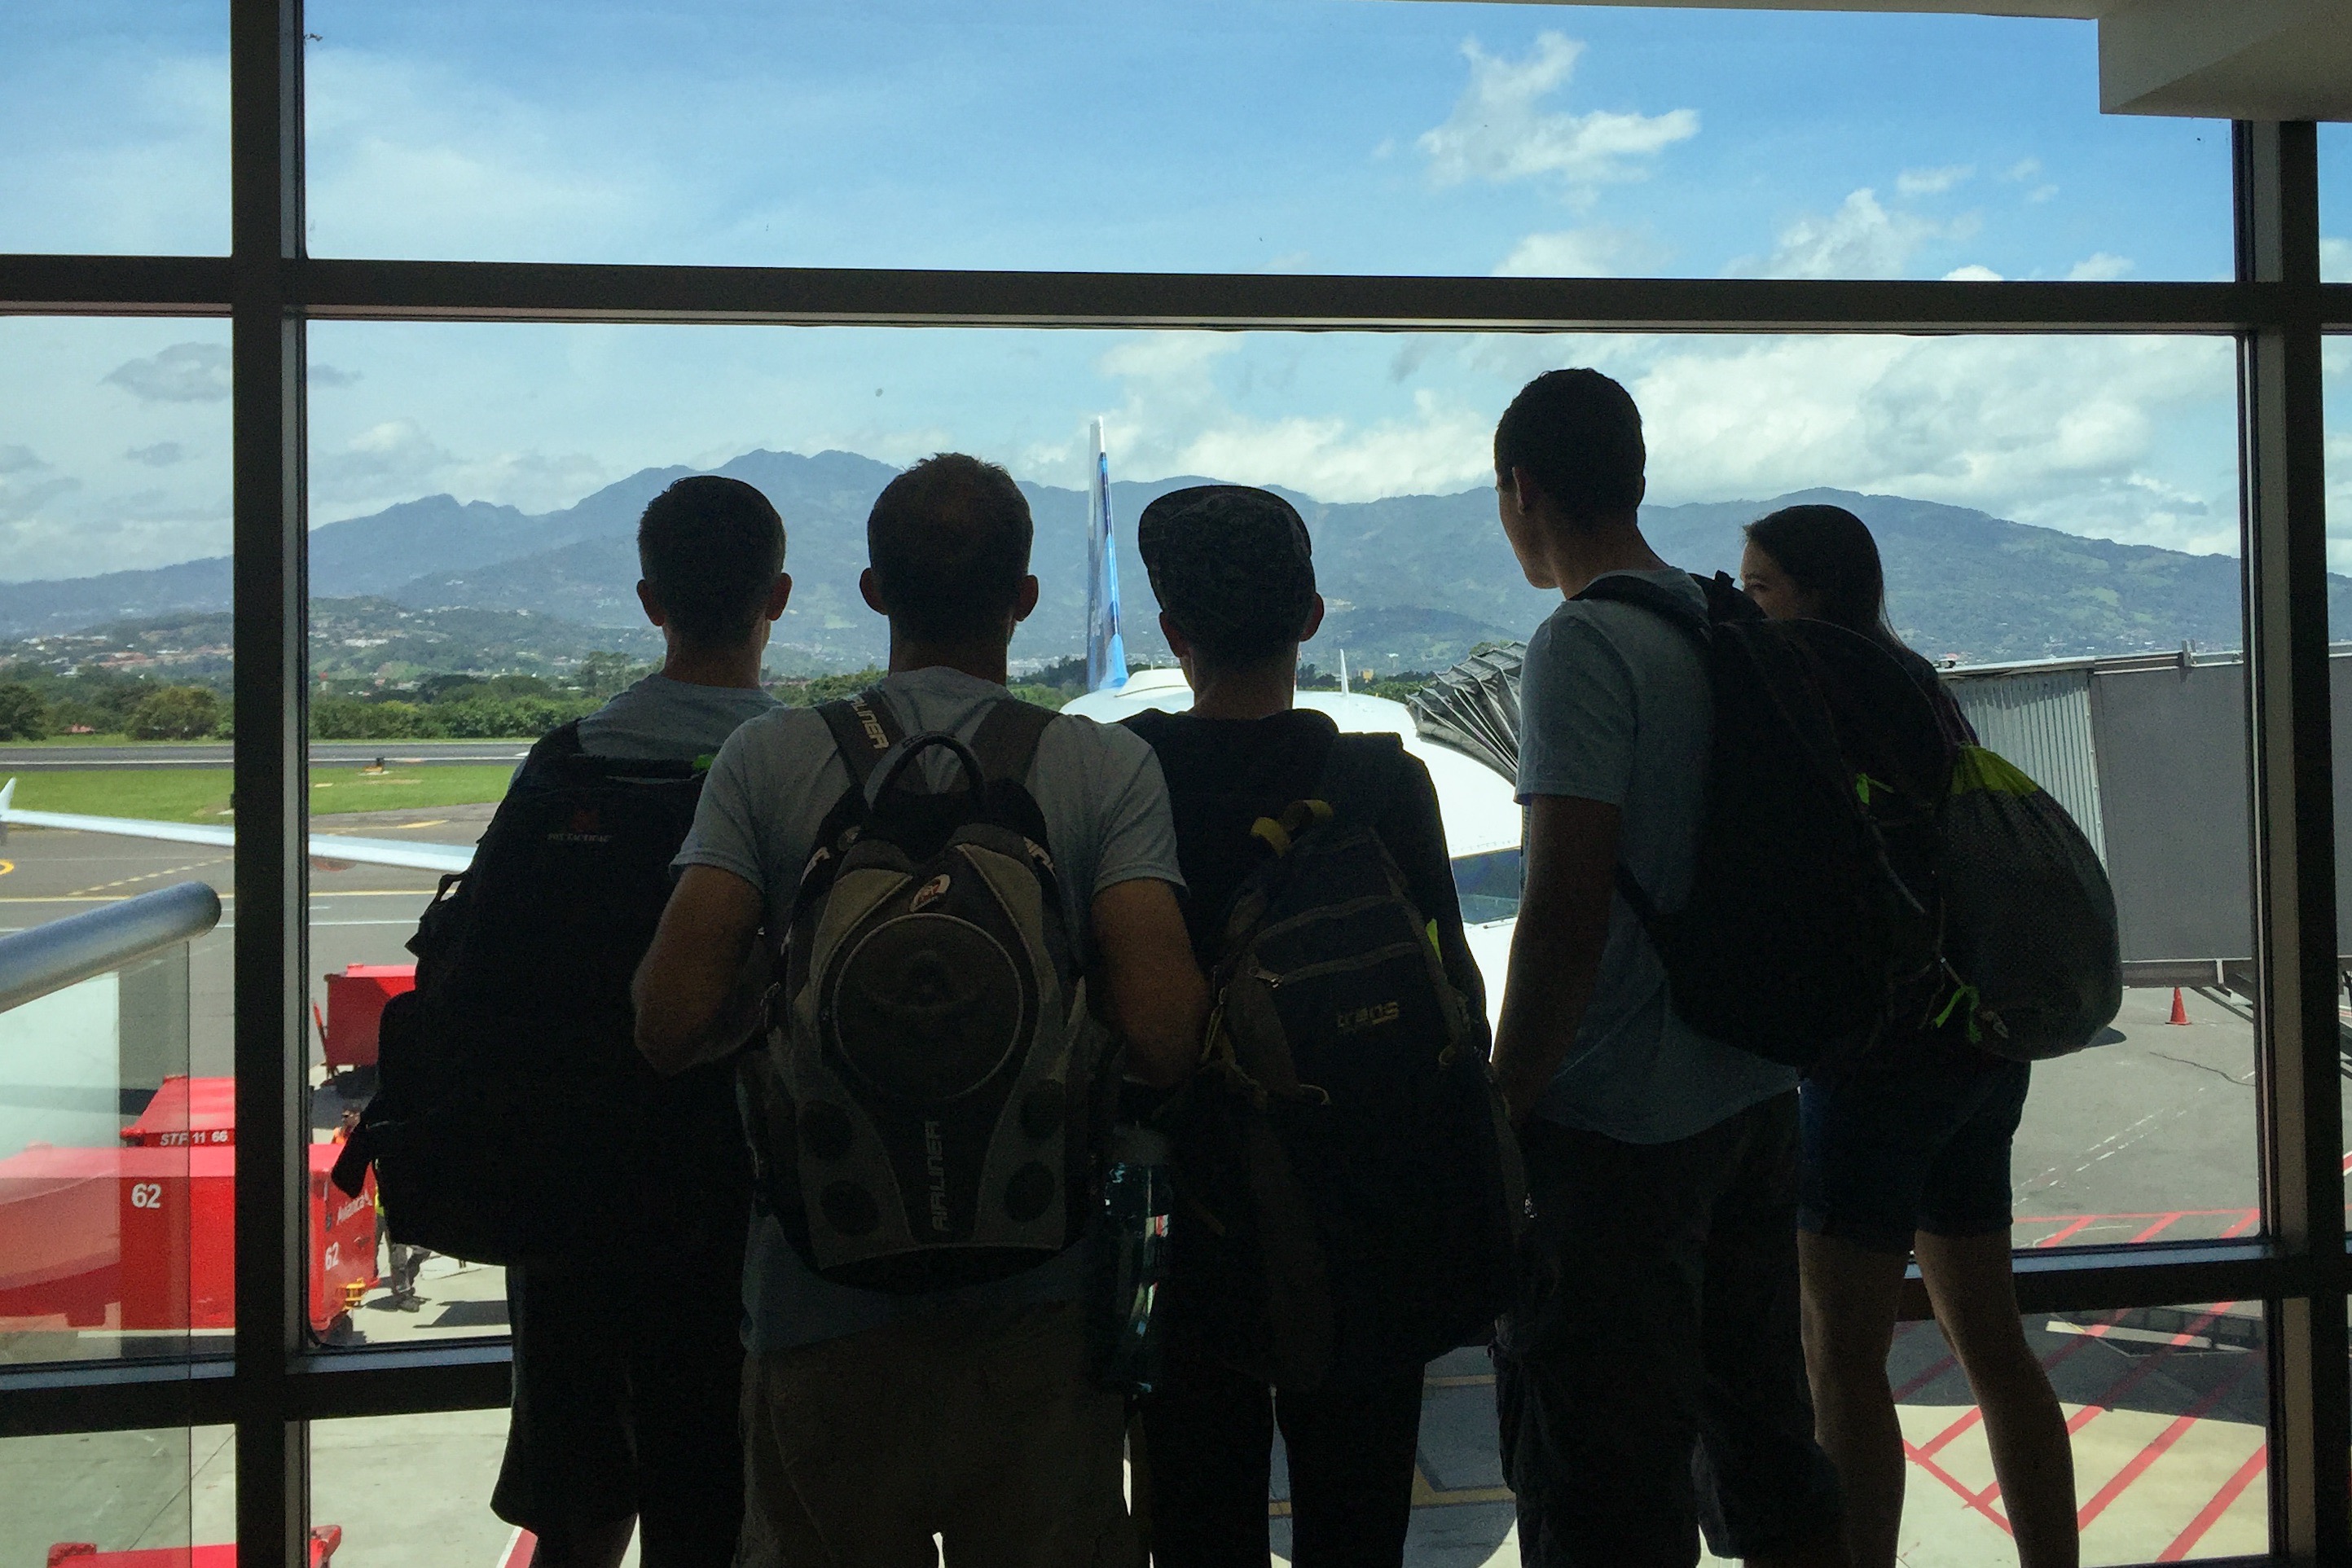 people at an airport looking out onto the tarmac